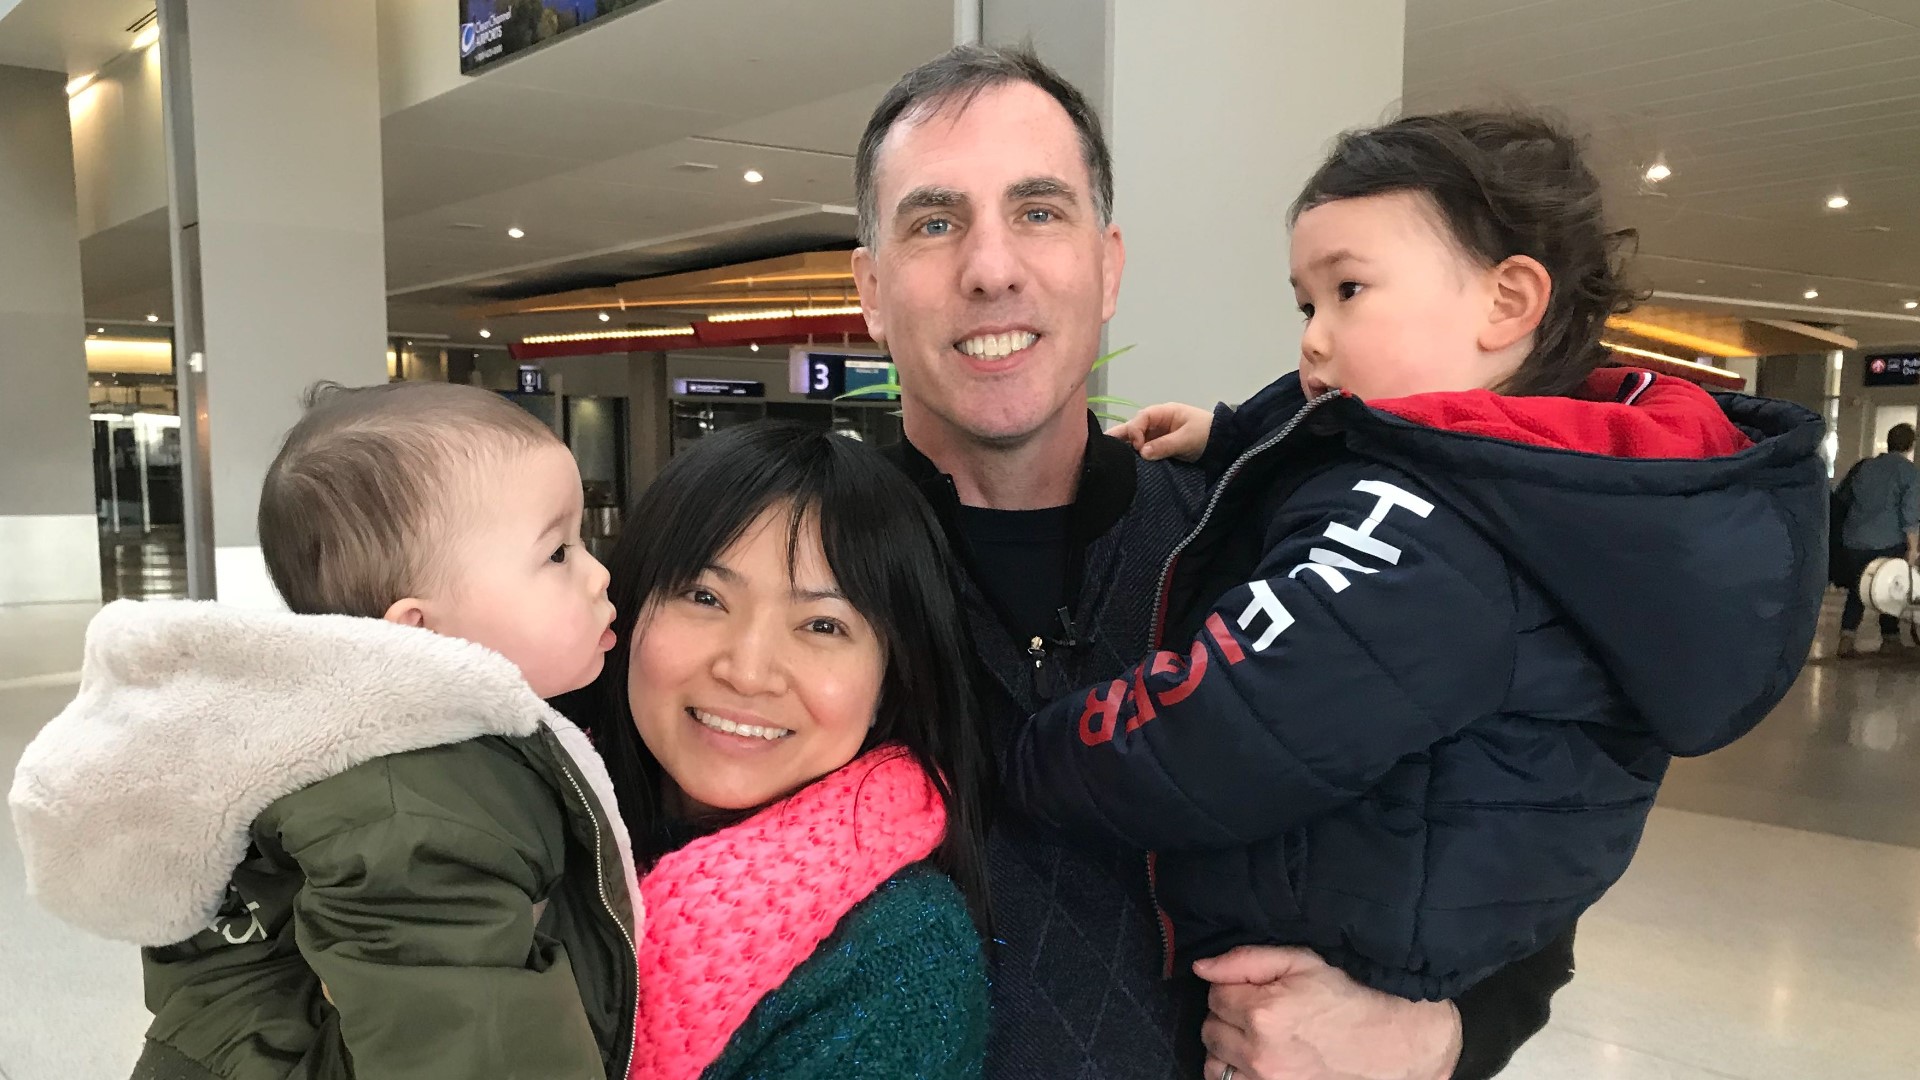 Yanjun Wei and her two young children left for Wuhan, China to visit family in November 2019. They're finally heading home to San Diego.